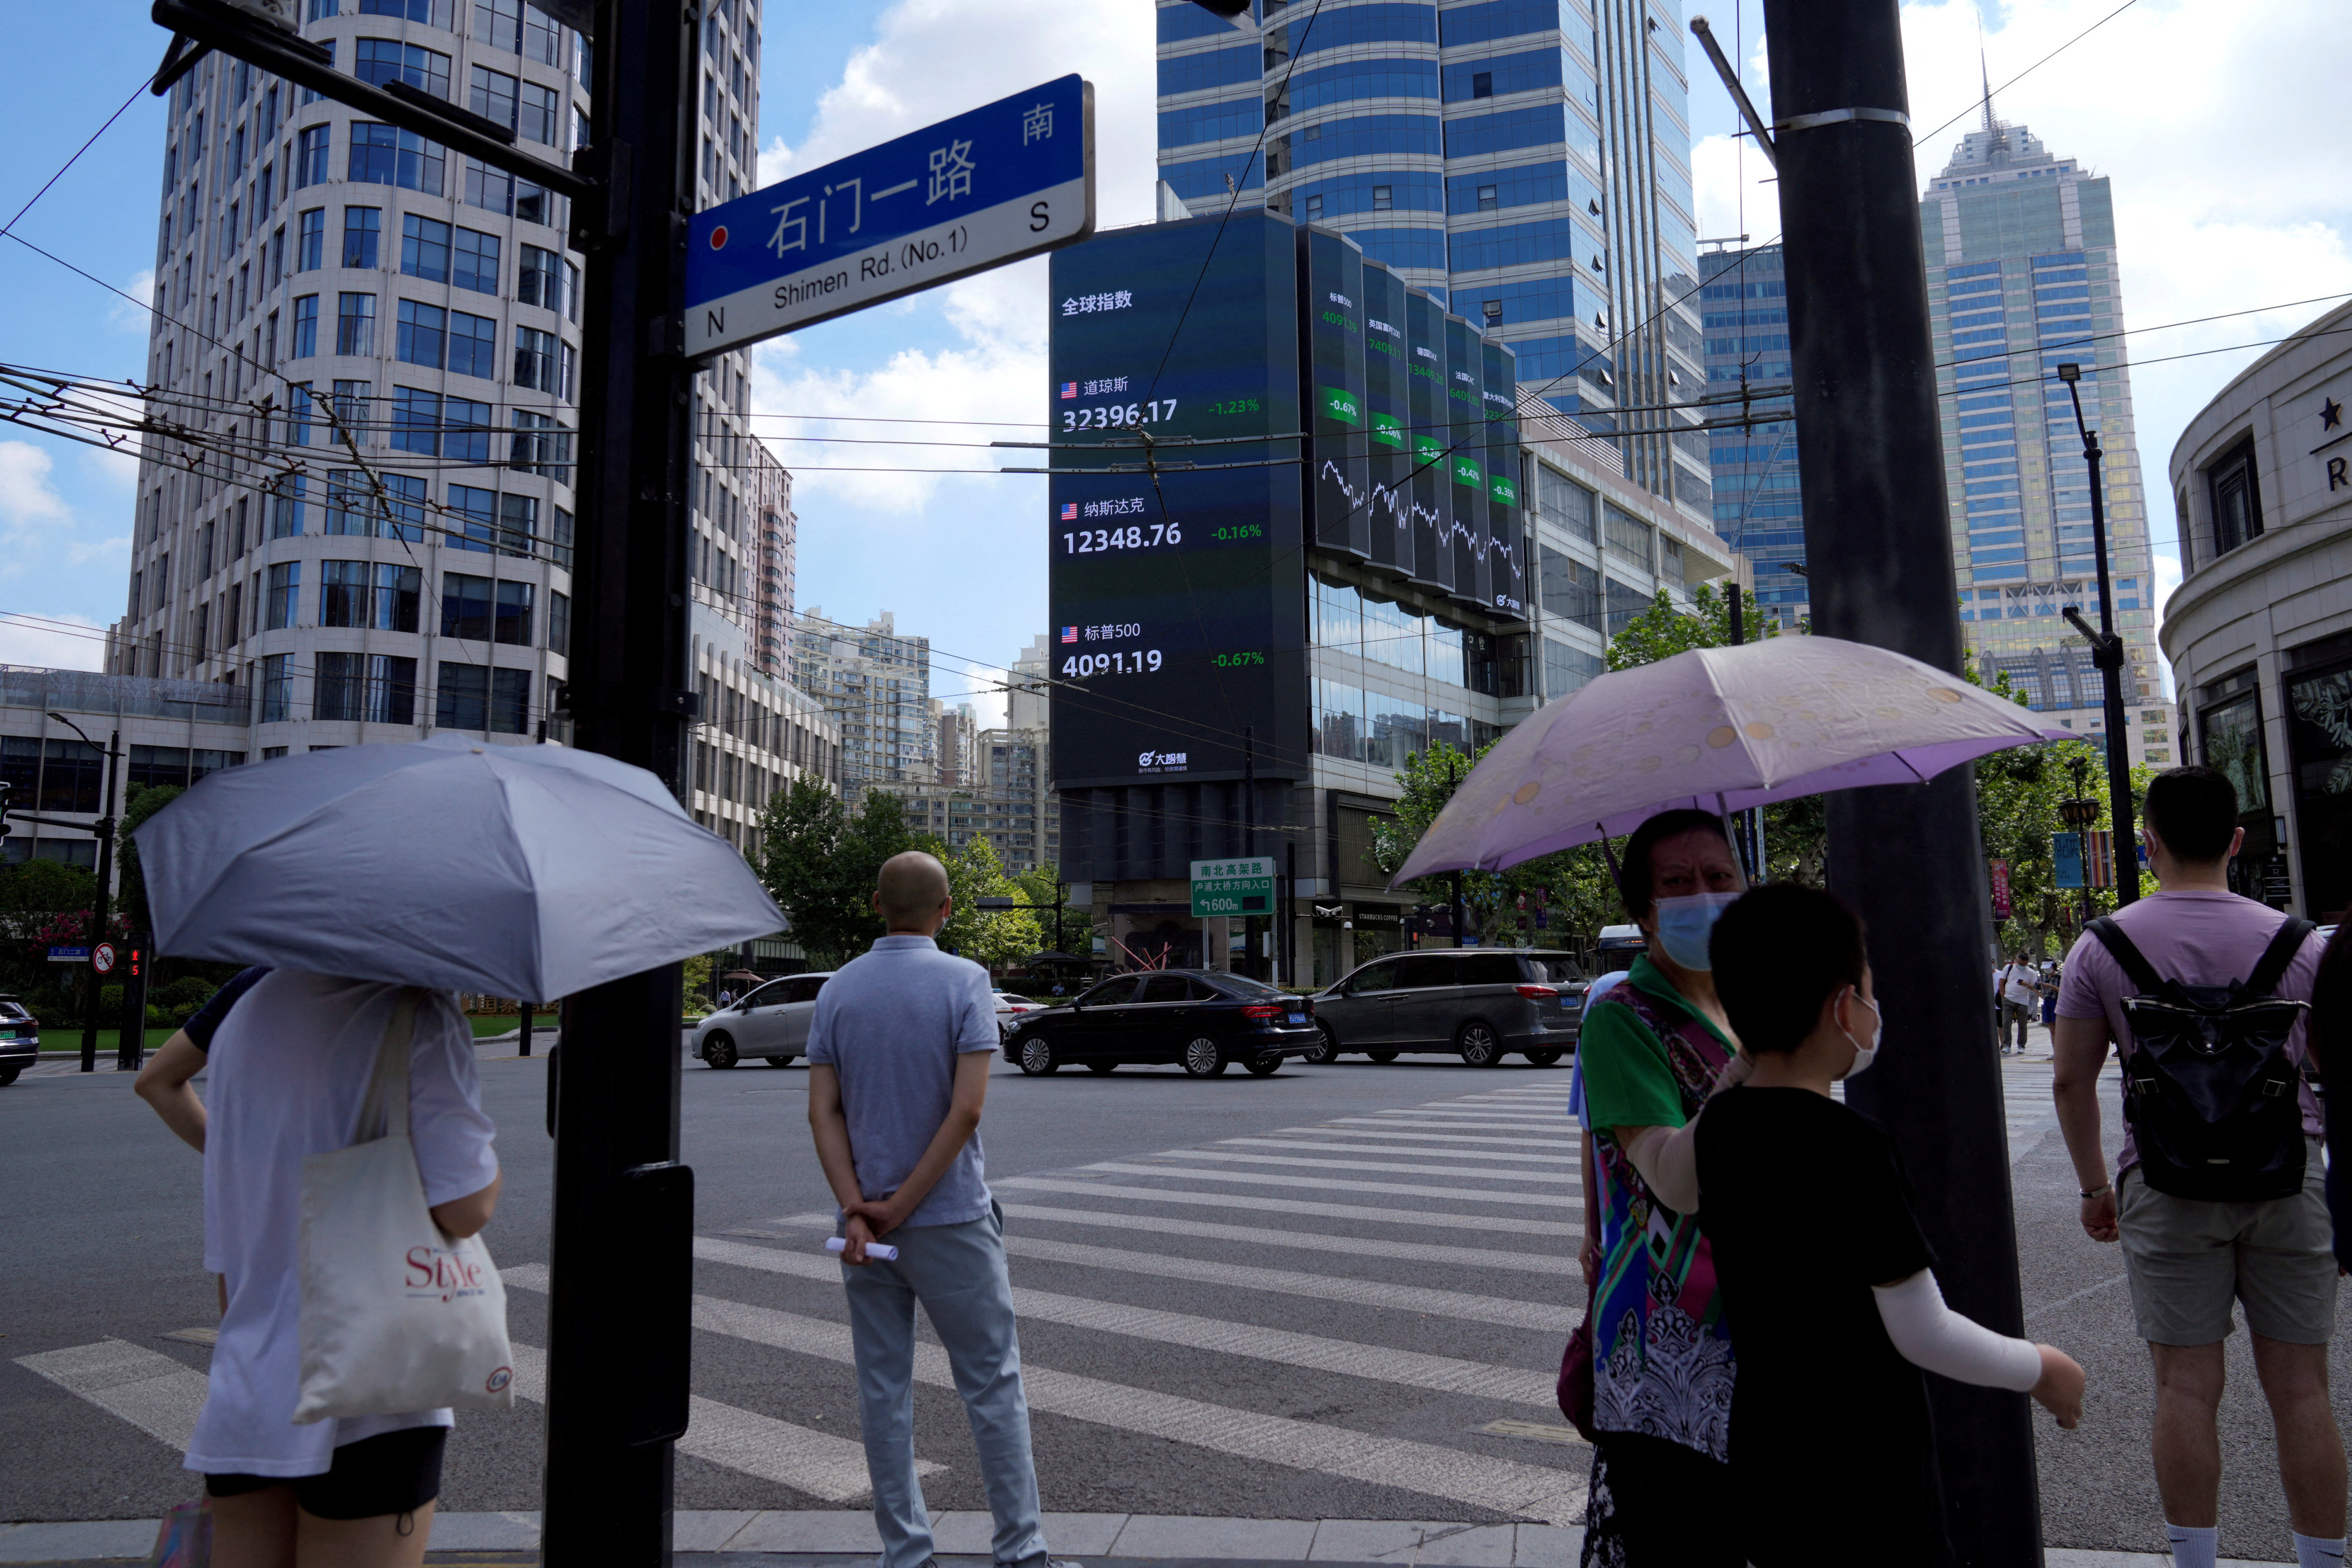 Pedestrians wait to cross a road at a junction near a giant display of stock indices in Shanghai. Photo: Reuters